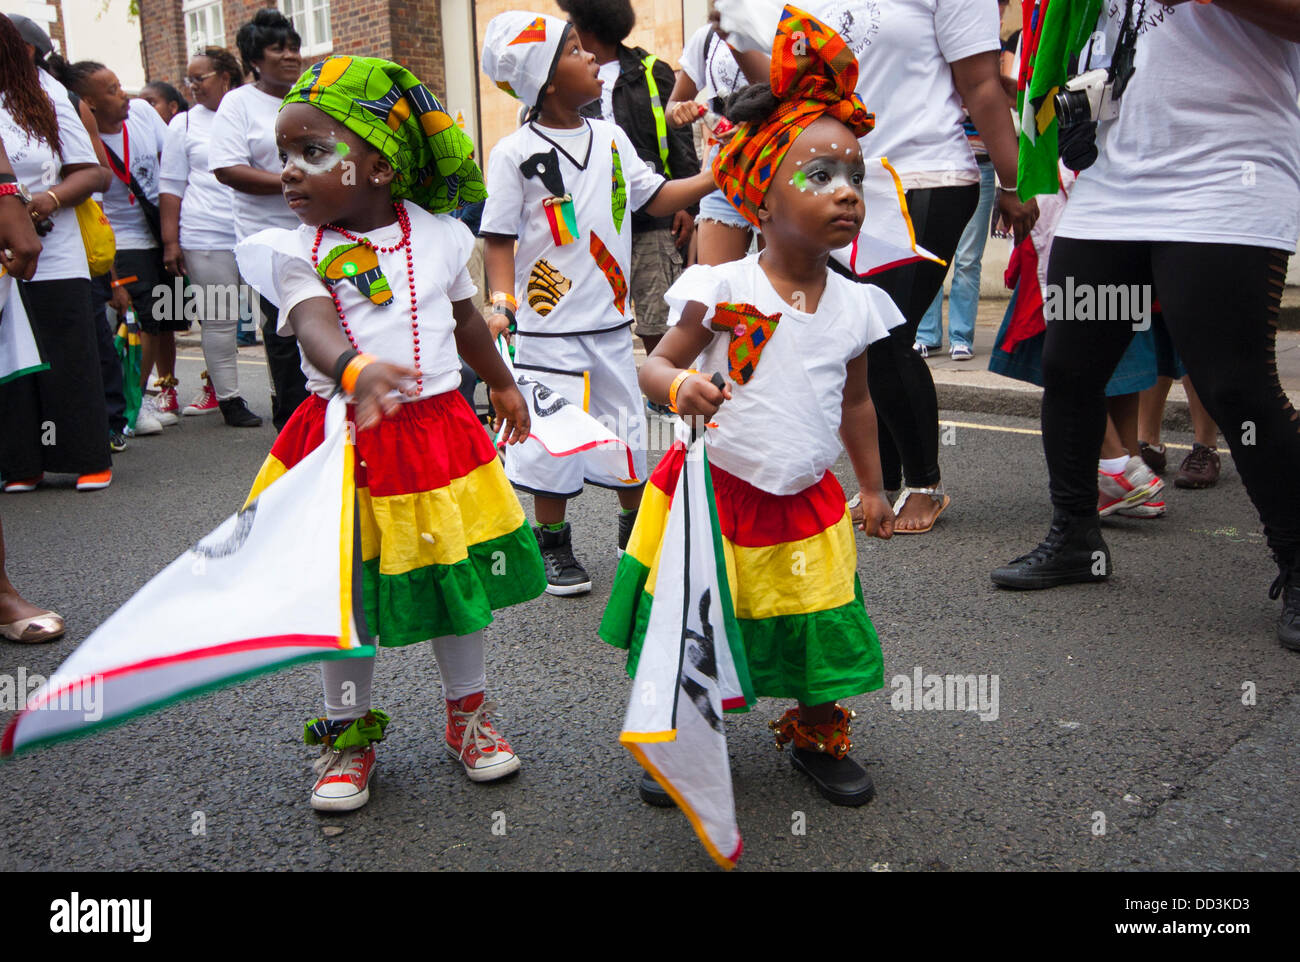 London, UK. 25th Aug, 2013. Two cute little girls i their costumes as the annual two-day Notting Hill Carnival celebrating Afro-Carribean culture and London's ethnic diversity gets underway. Credit:  Paul Davey/Alamy Live News Stock Photo